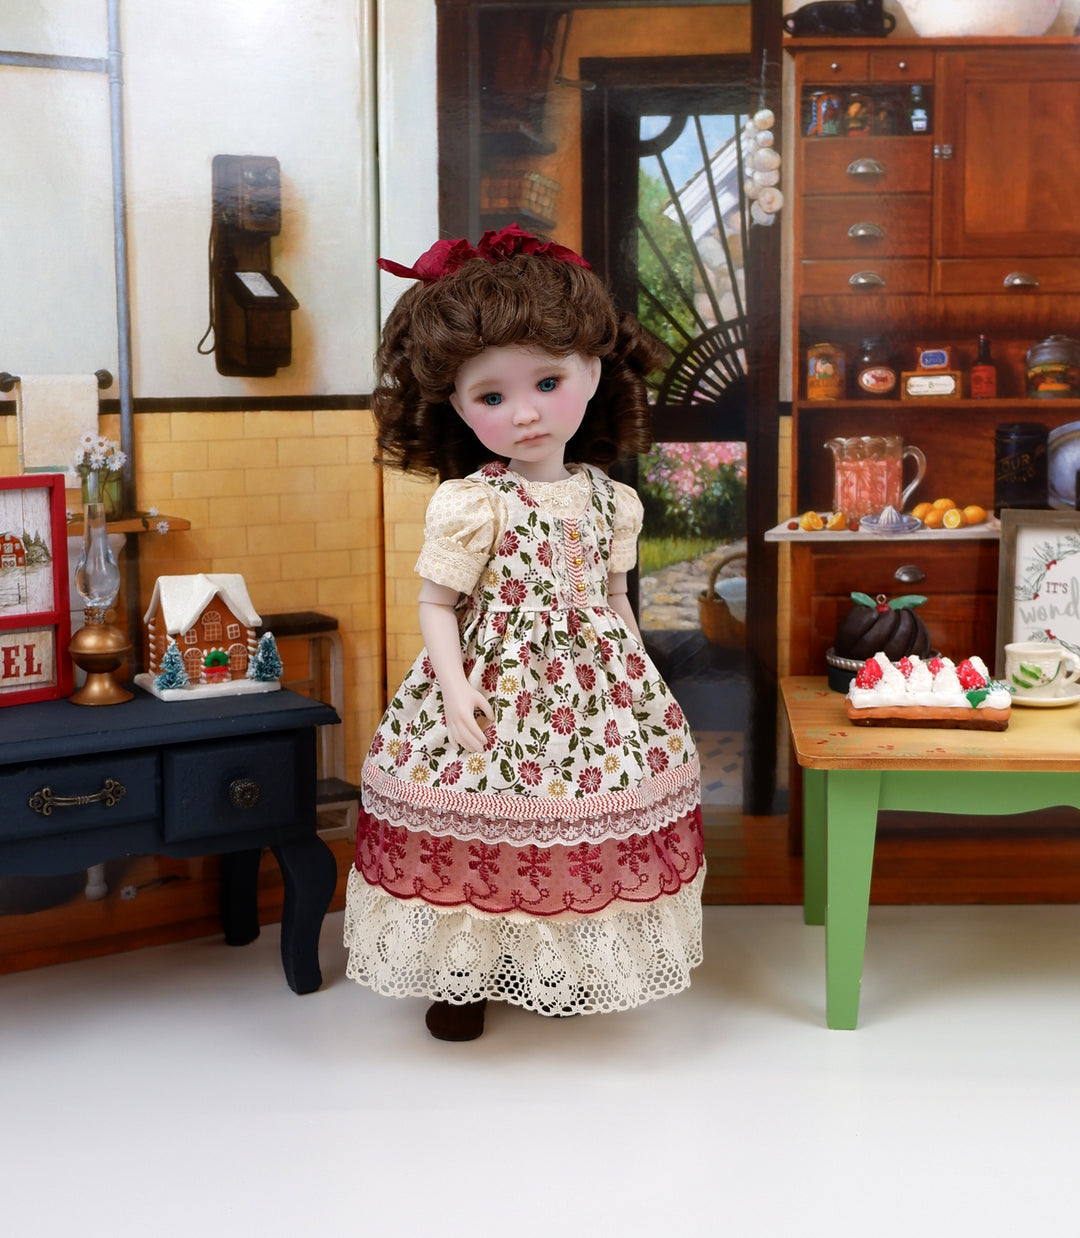 Vivian - custom Victorian themed Ruby Red Fashion Friend doll & wardrobe with shoes